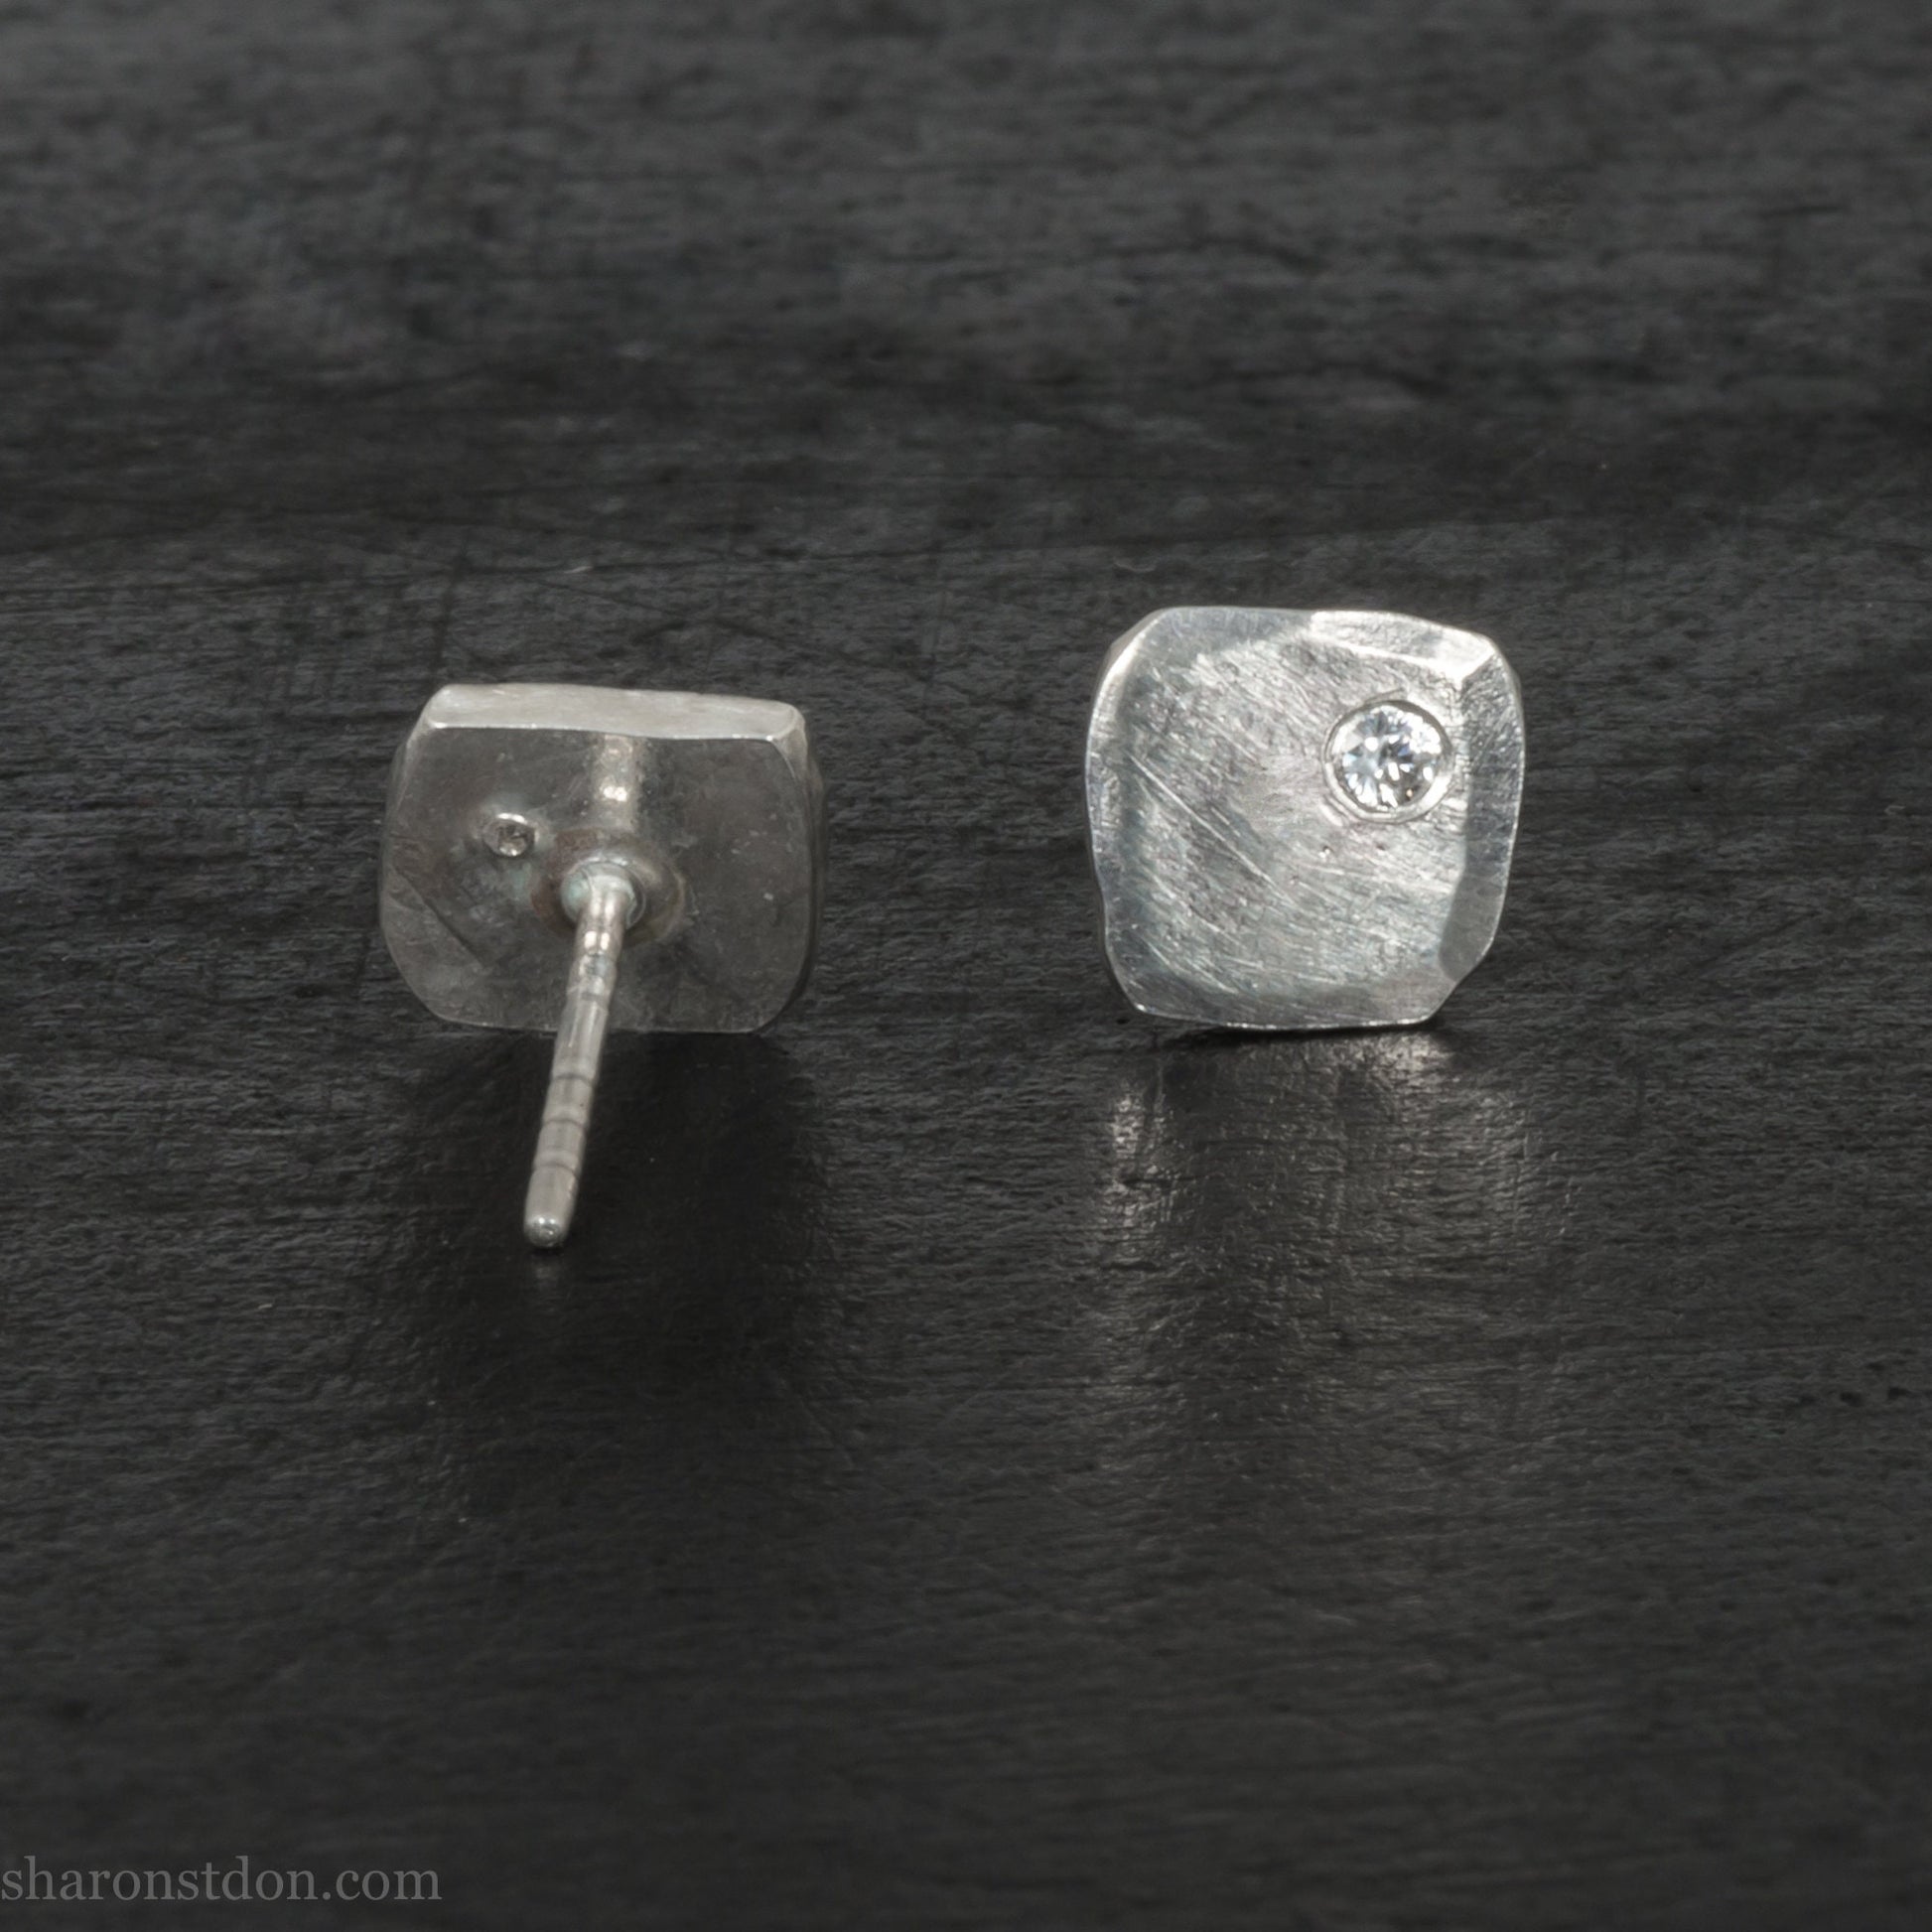 Canadian diamond stud earrings for men or women | Small 7mm square studs, solid 925 sterling silver | Handmade unique gift for him or her